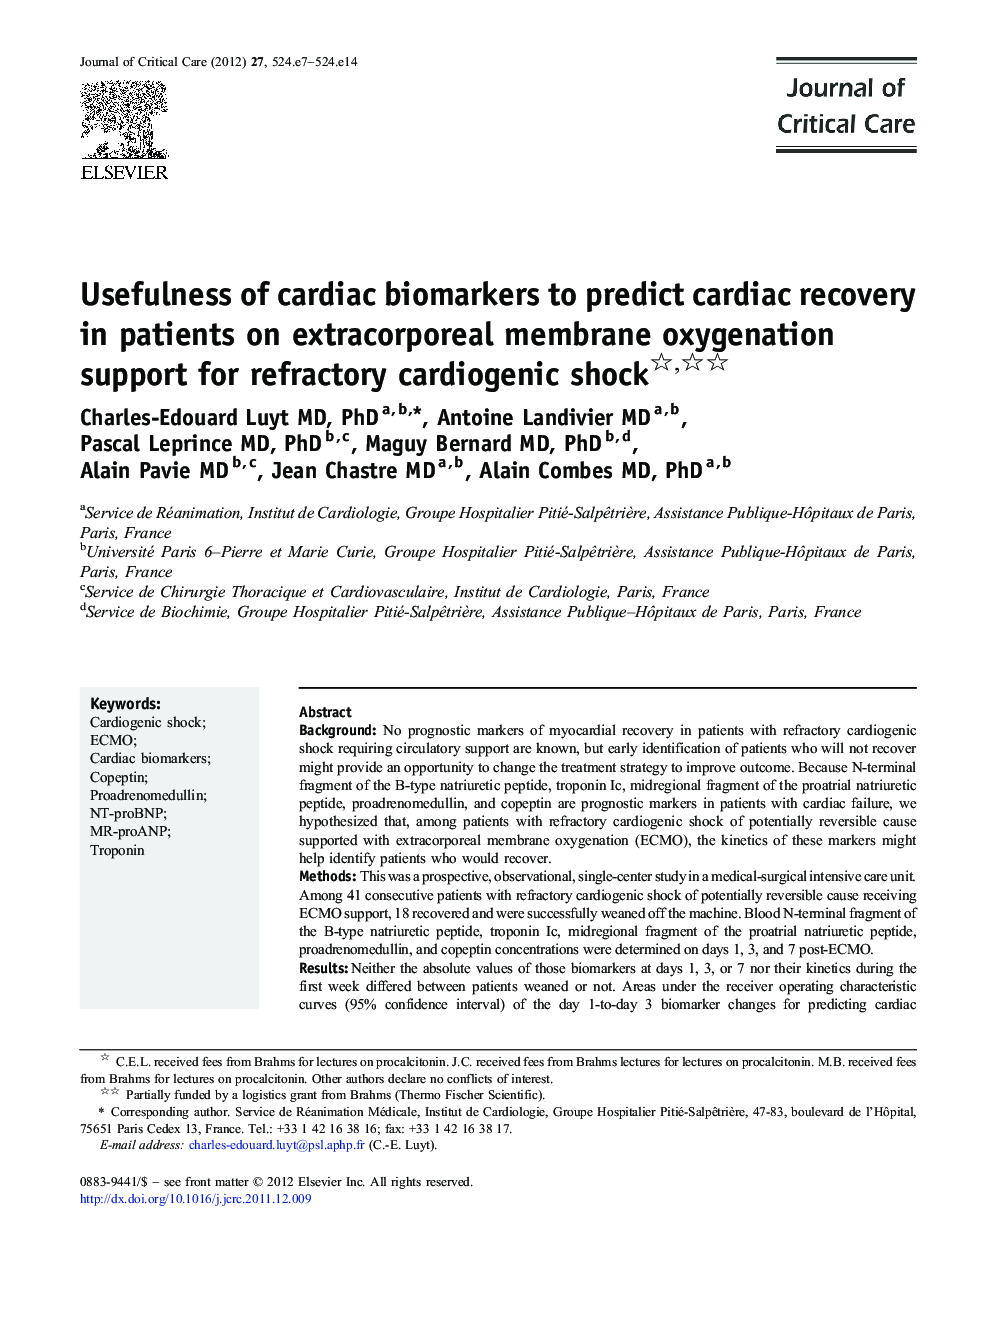 Usefulness of cardiac biomarkers to predict cardiac recovery in patients on extracorporeal membrane oxygenation support for refractory cardiogenic shock